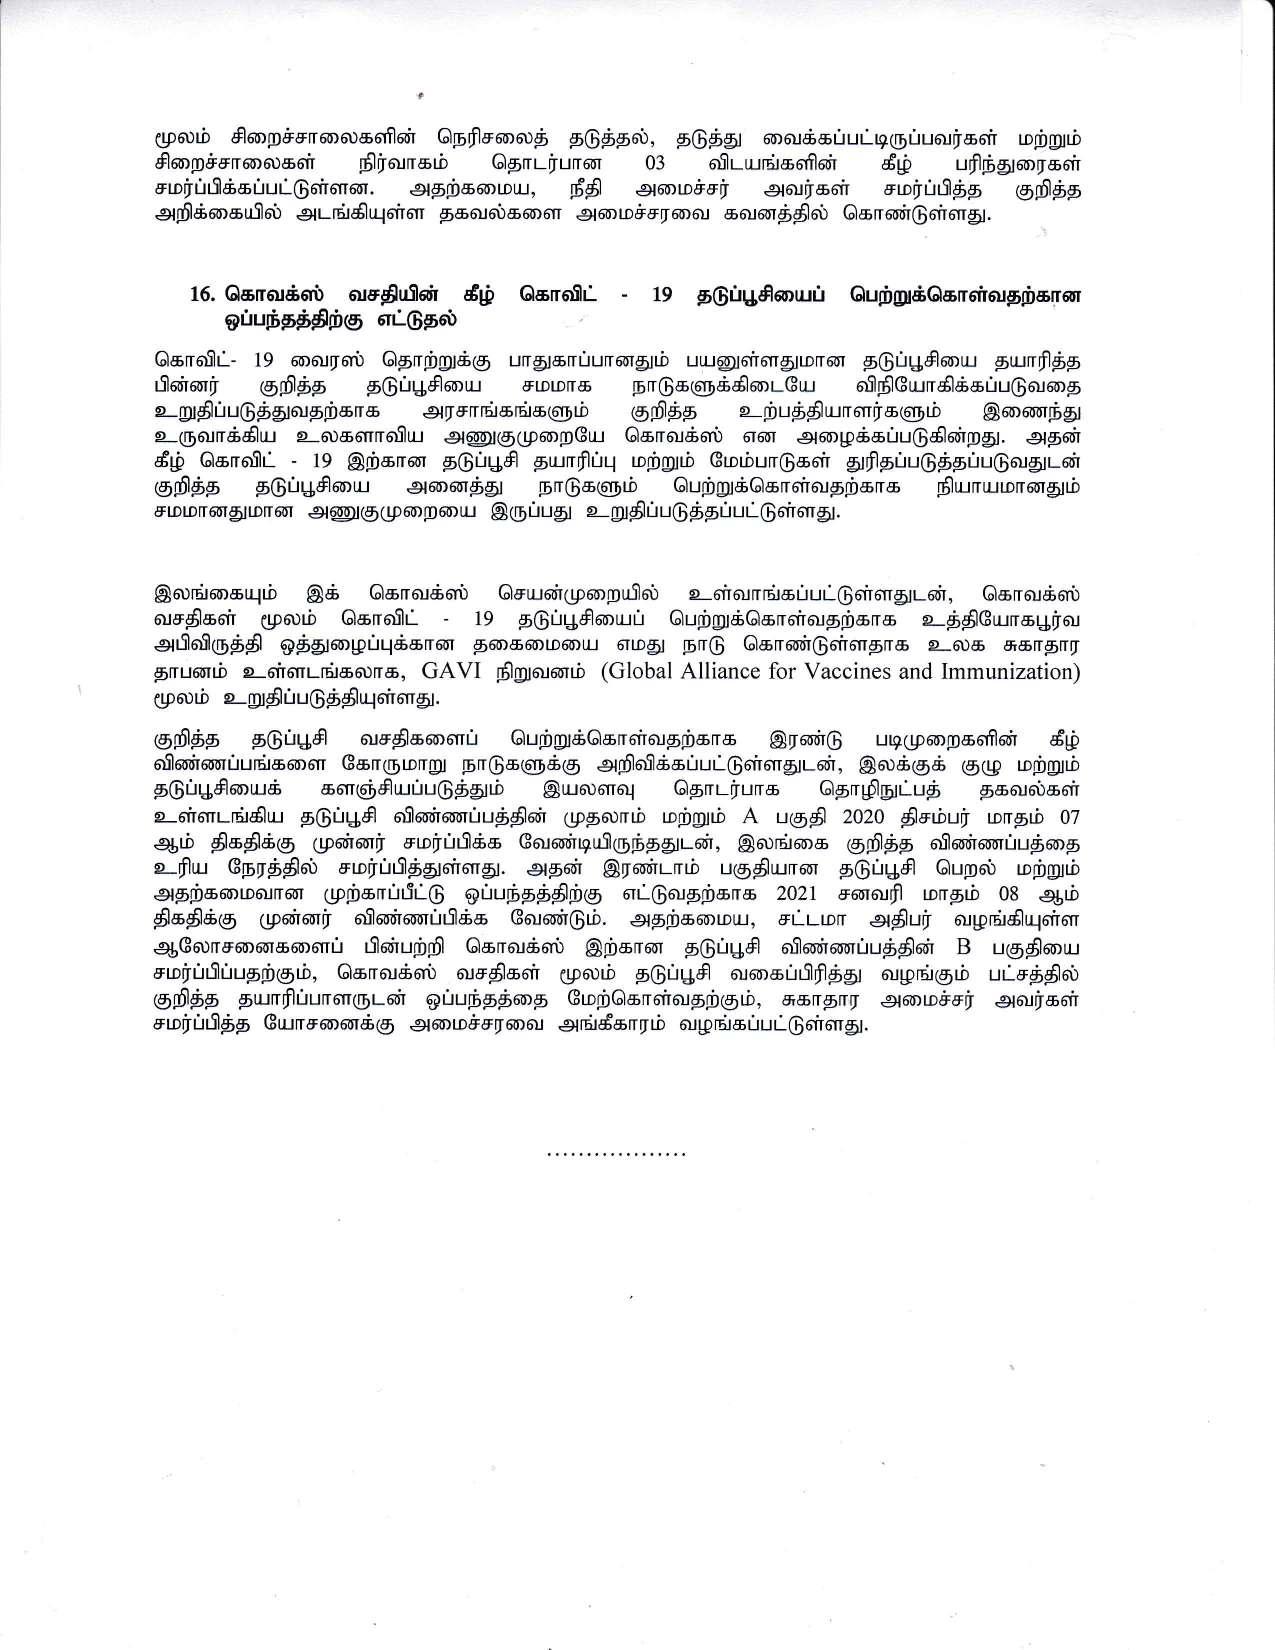 Cabinet Decision on 04.01.2021 Tamil page 006